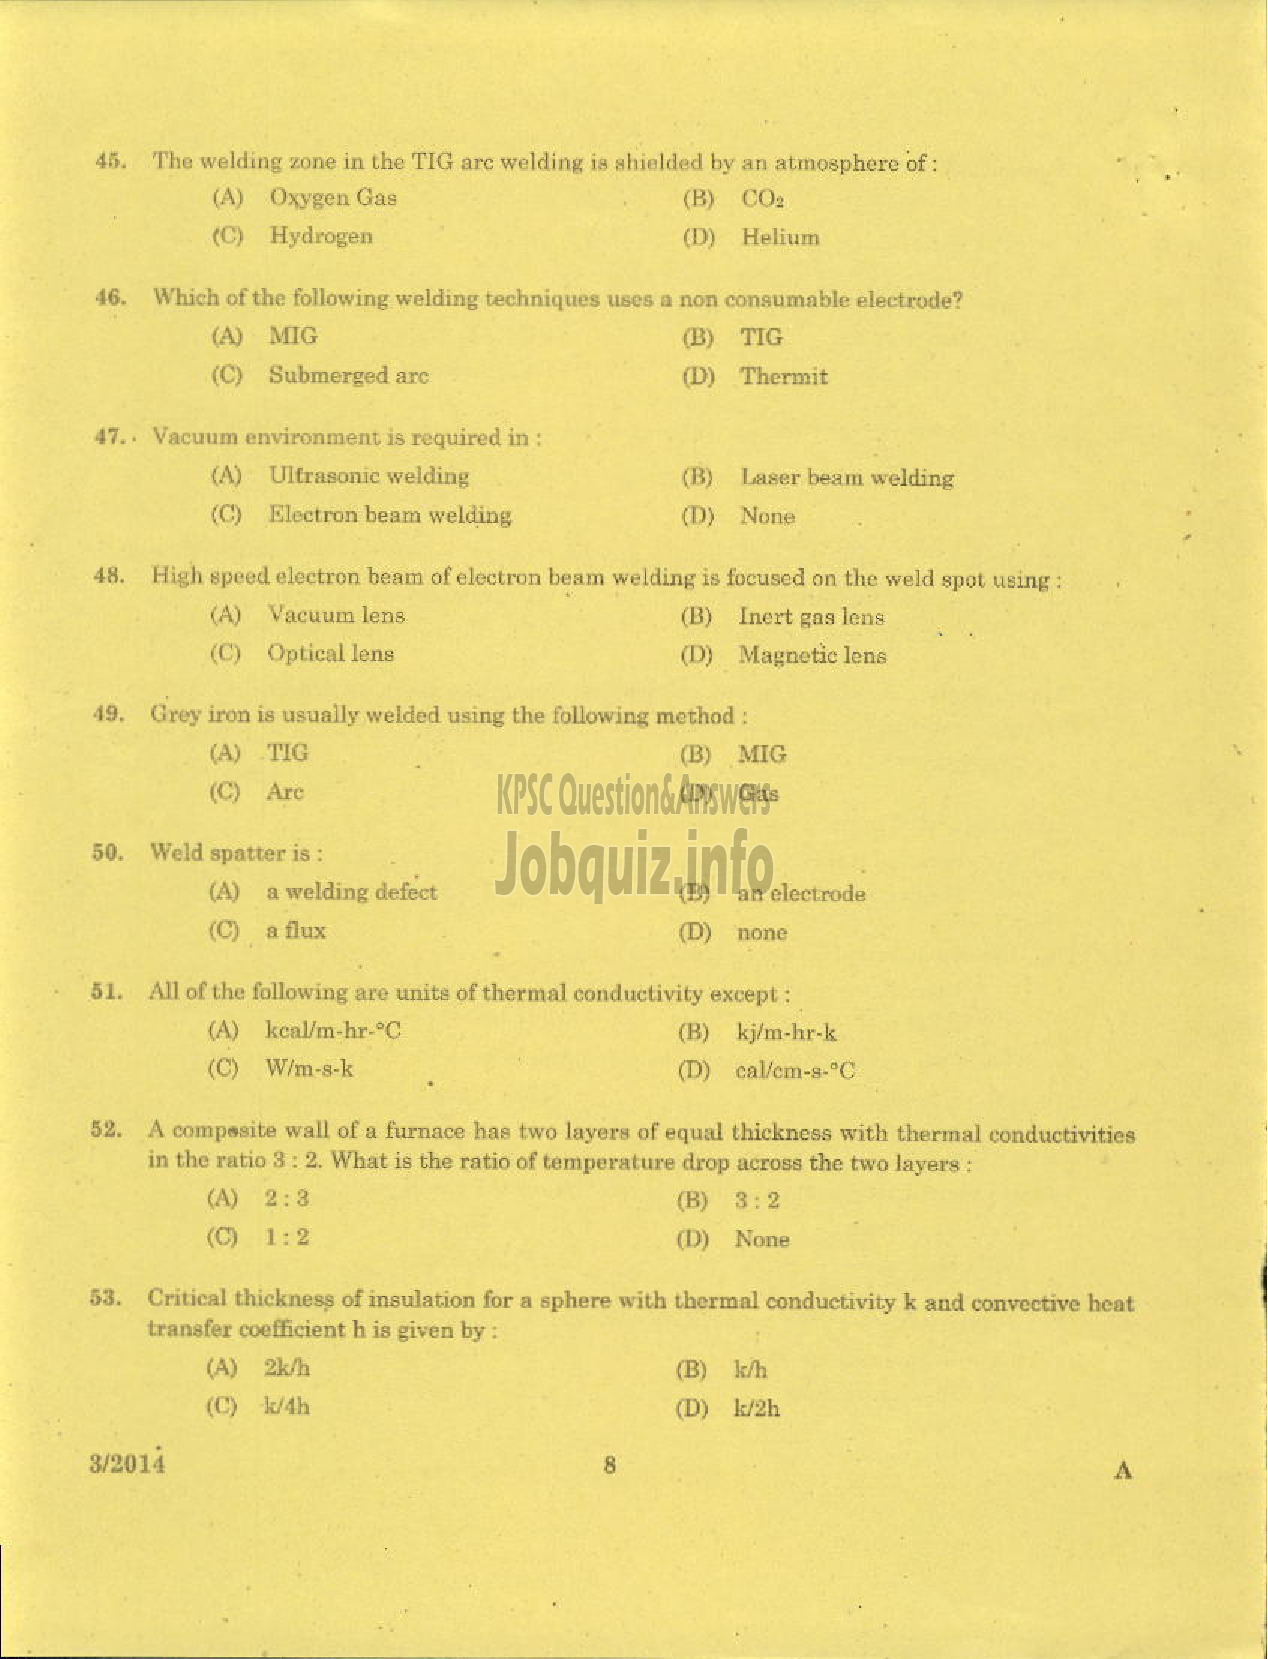 Kerala PSC Question Paper - LECTURER IN MACHANICAL ENGINEERING POLYTECHNICS TECHNICAL EDUCATION-6